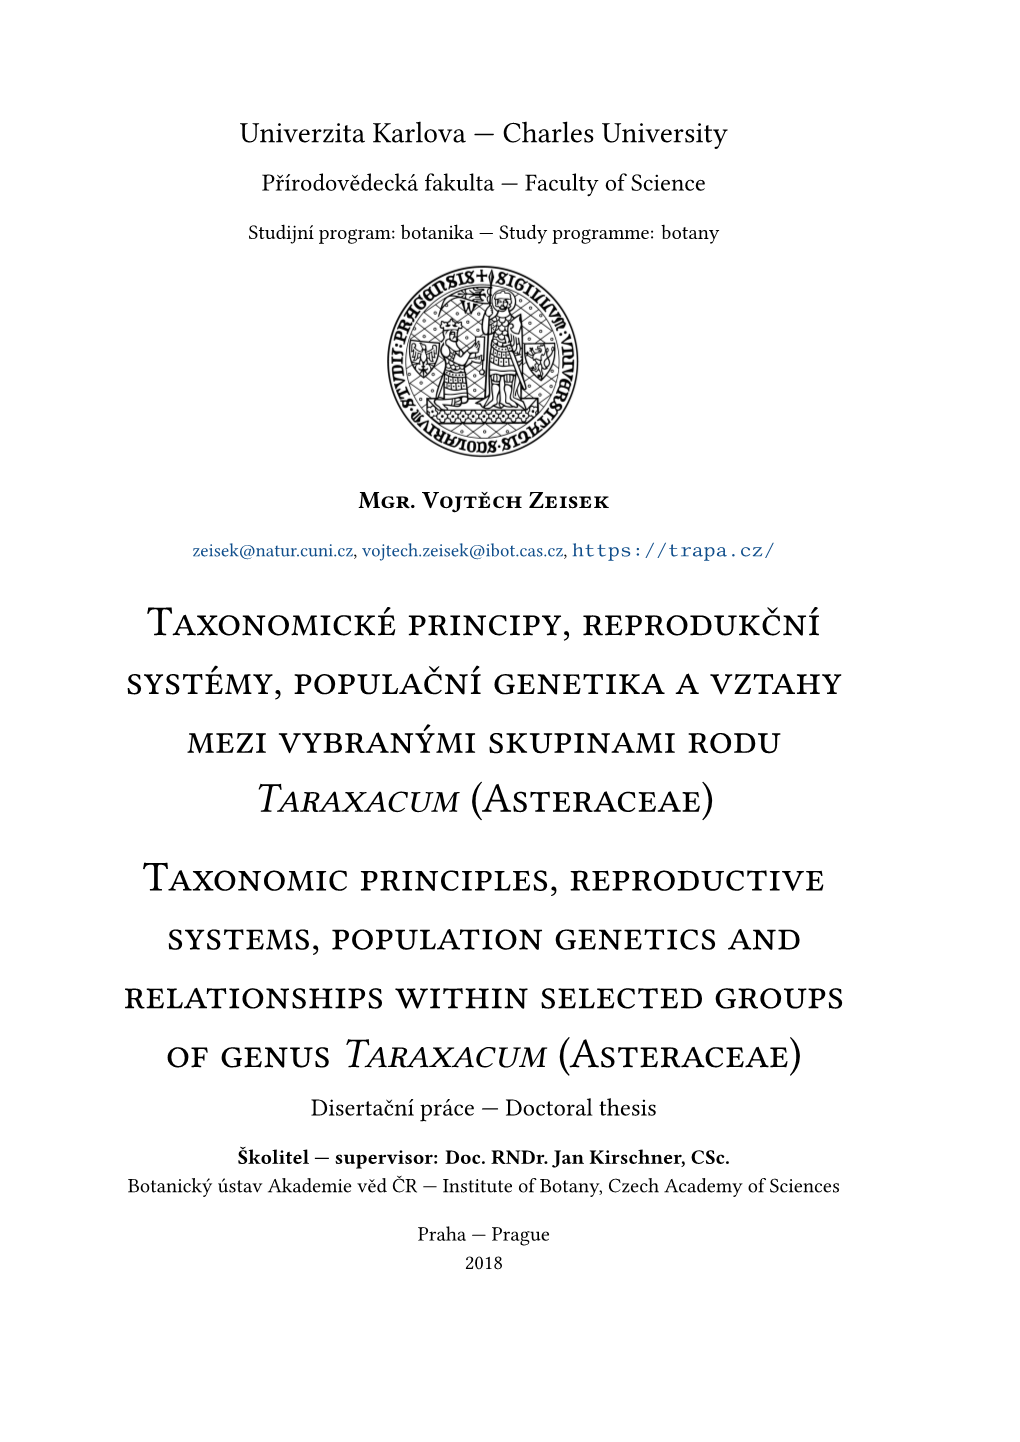 Taxonomic Principles, Reproductive Systems, Population Genetics And